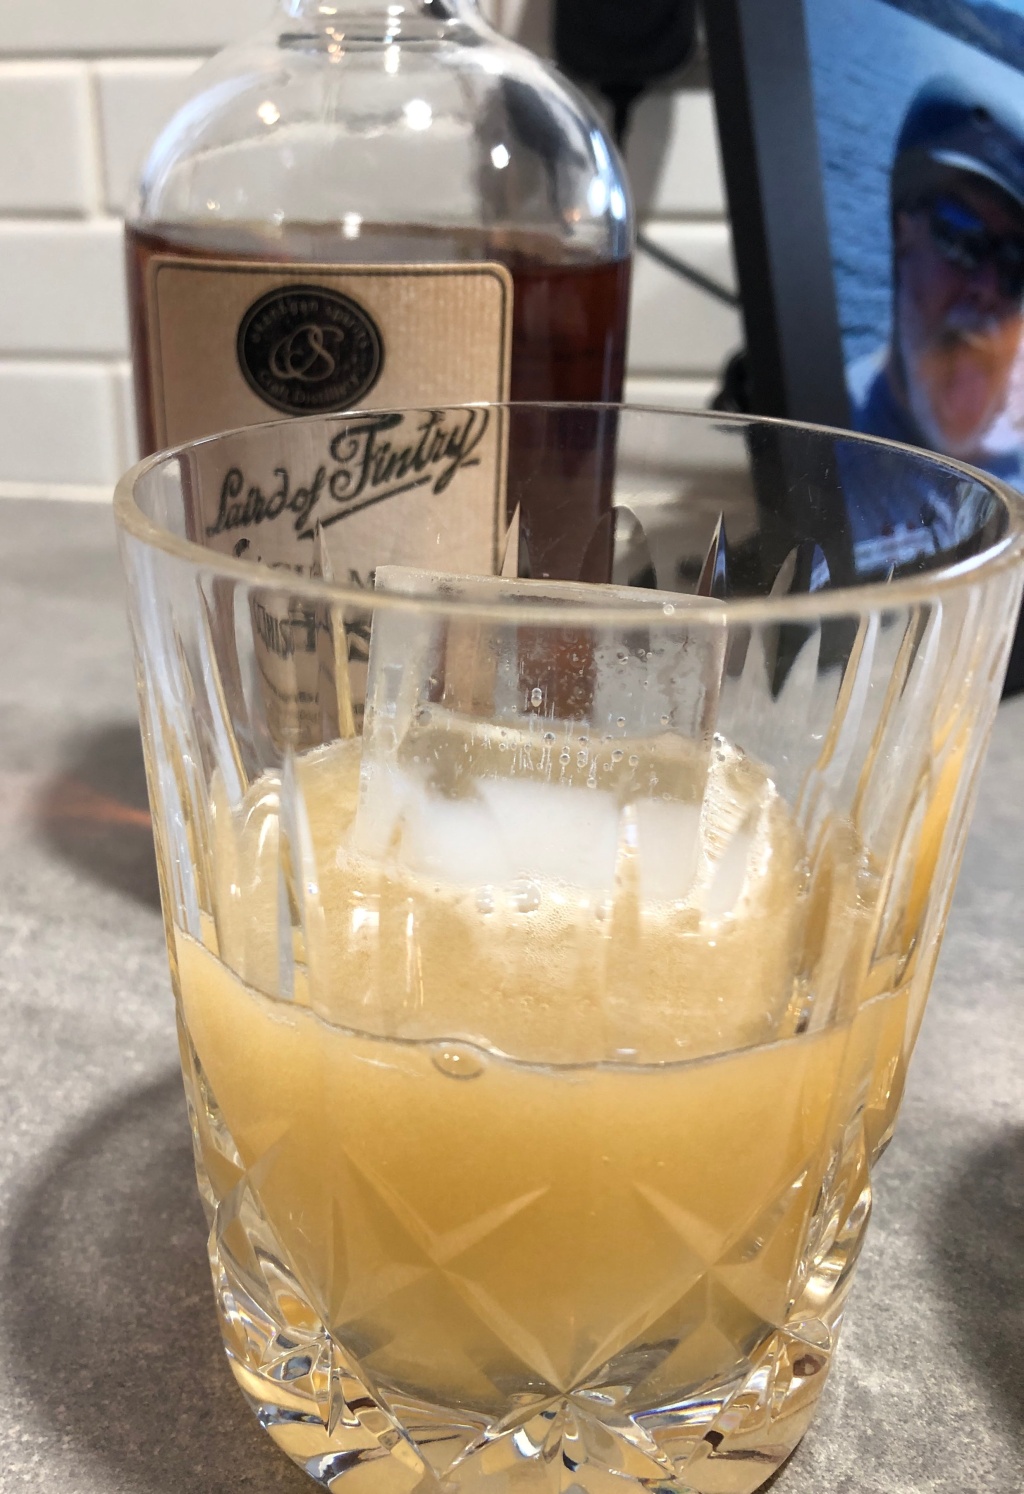 Things to make: Penicillin – WHISKY COCKTAIL